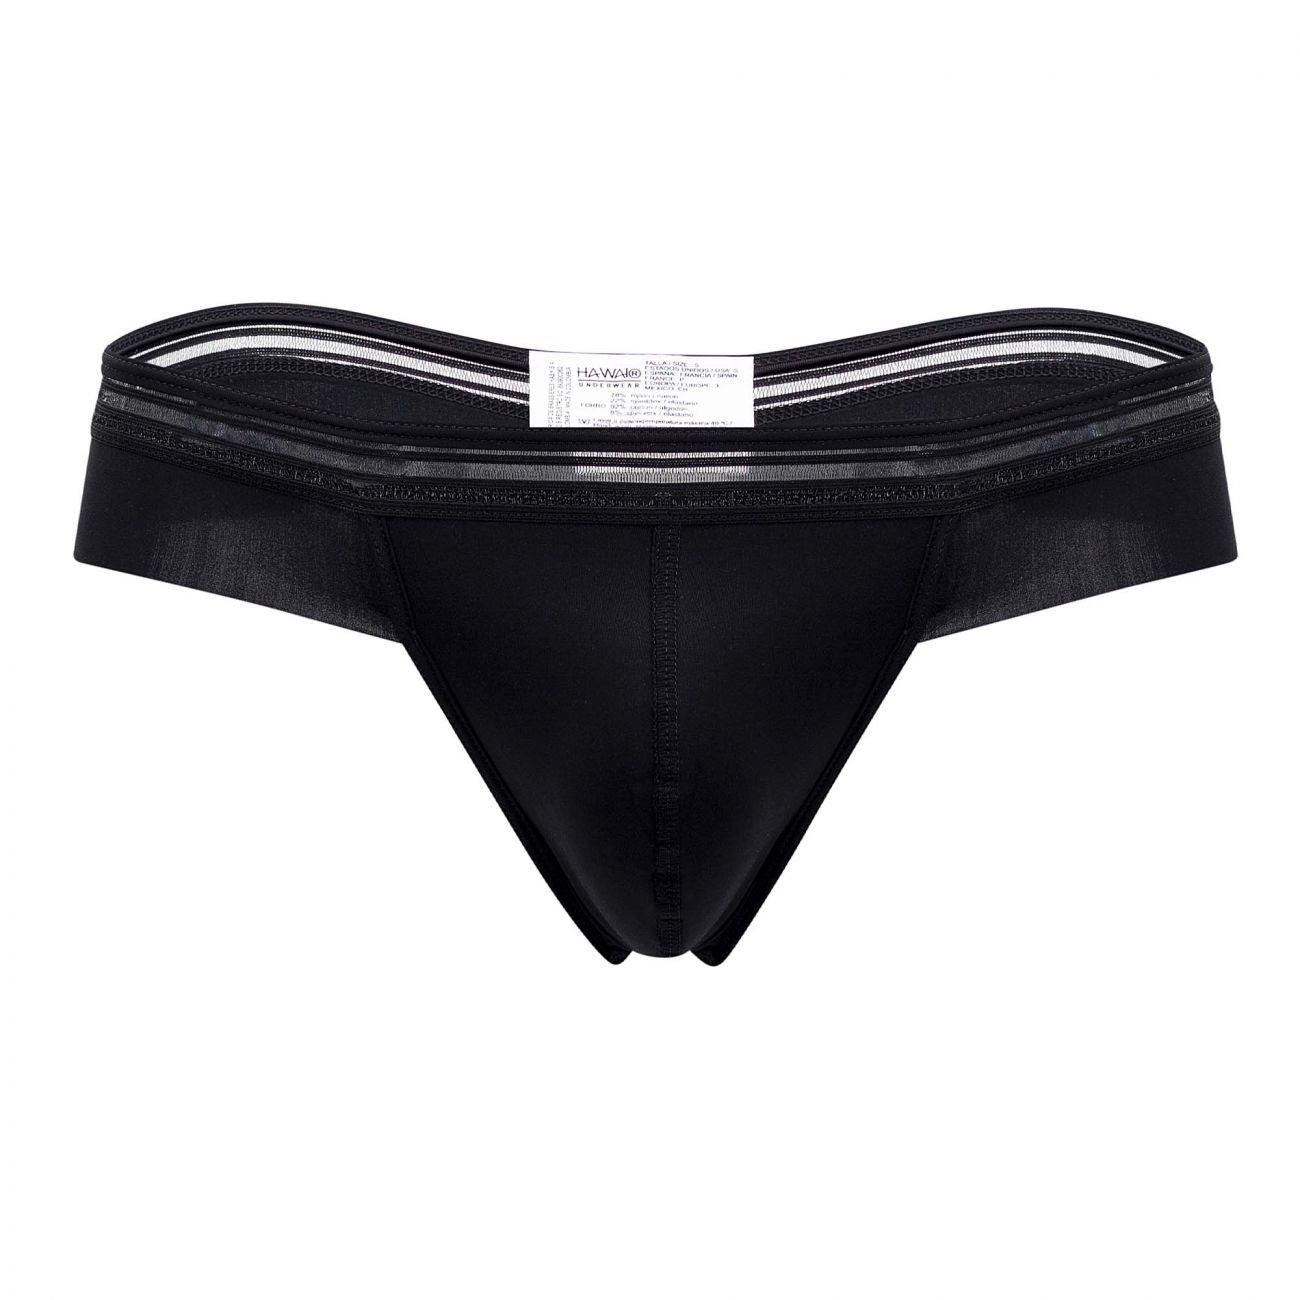 image of product,Solid Microfiber Thongs - SEXYEONE